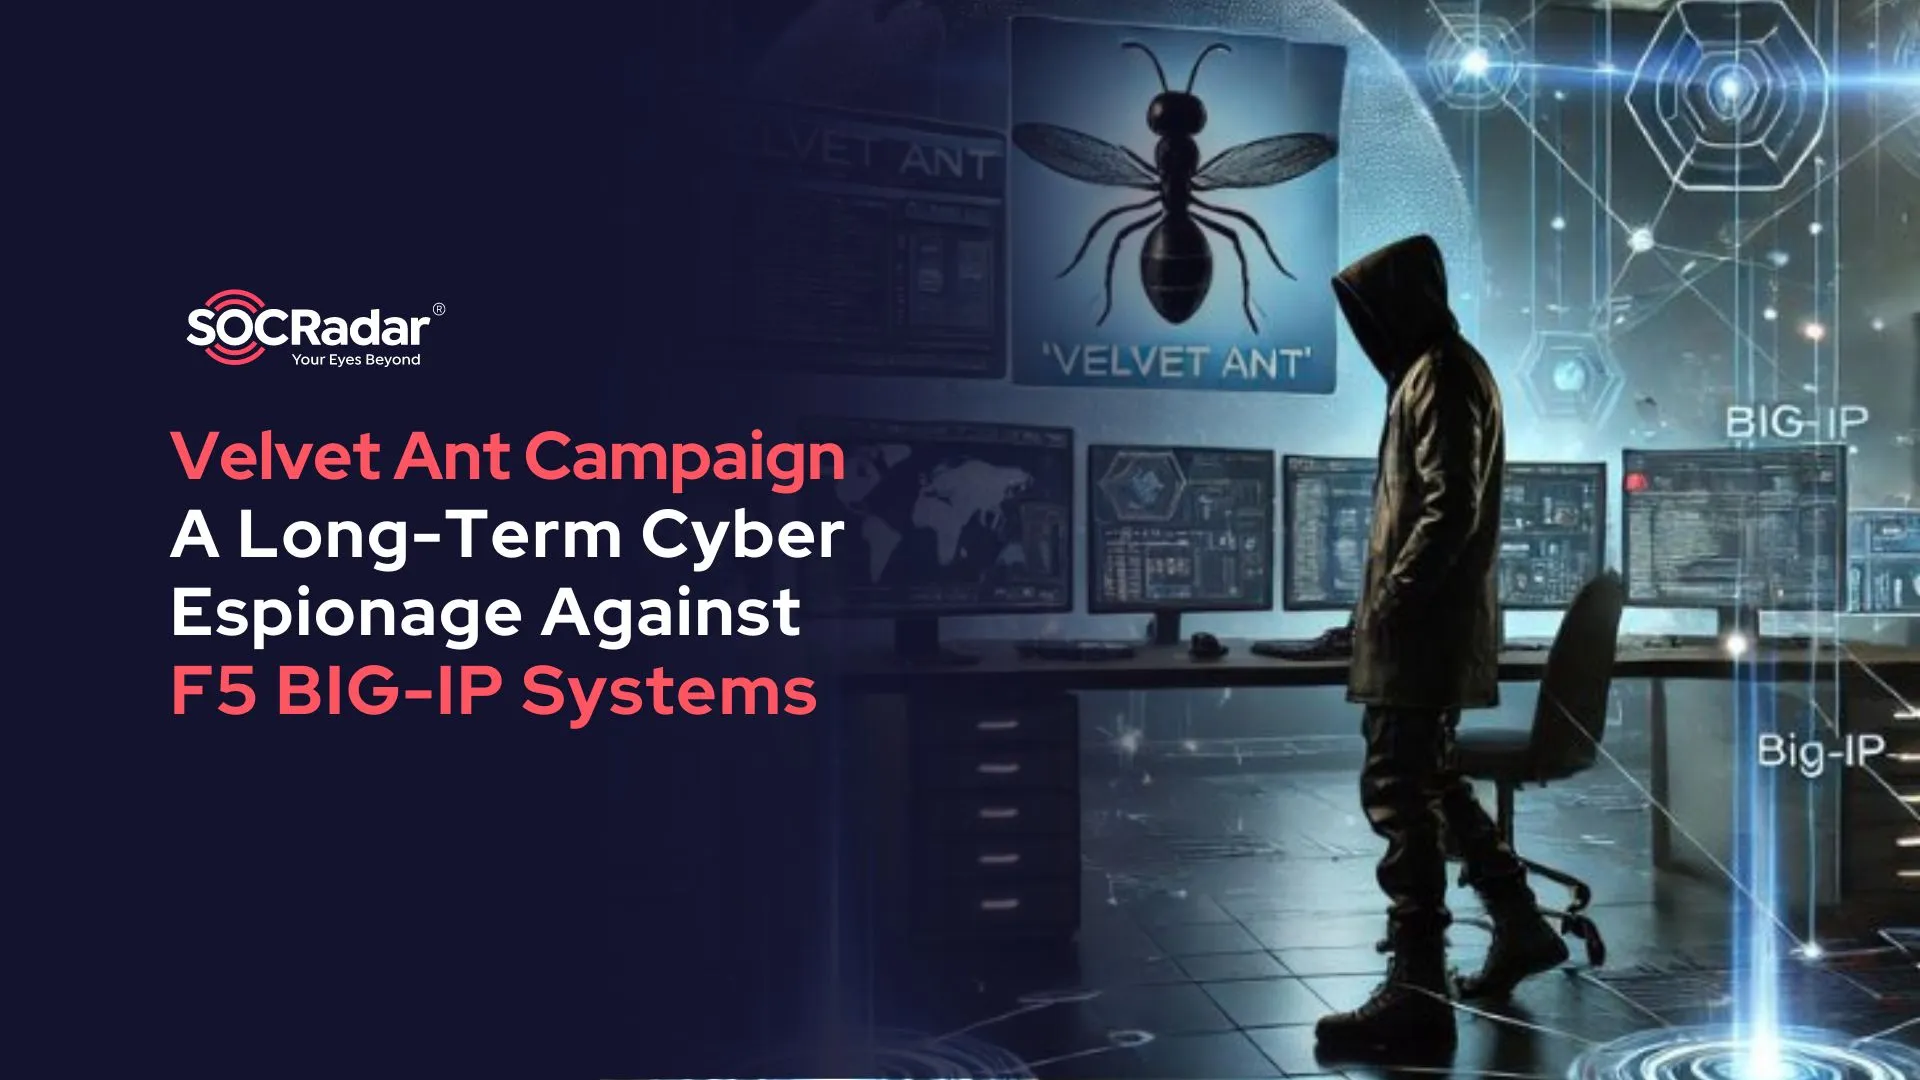 SOCRadar® Cyber Intelligence Inc. | Velvet Ant's Strategic Targeting: A Long-Term Cyber Espionage Campaign Against F5 BIG-IP Systems